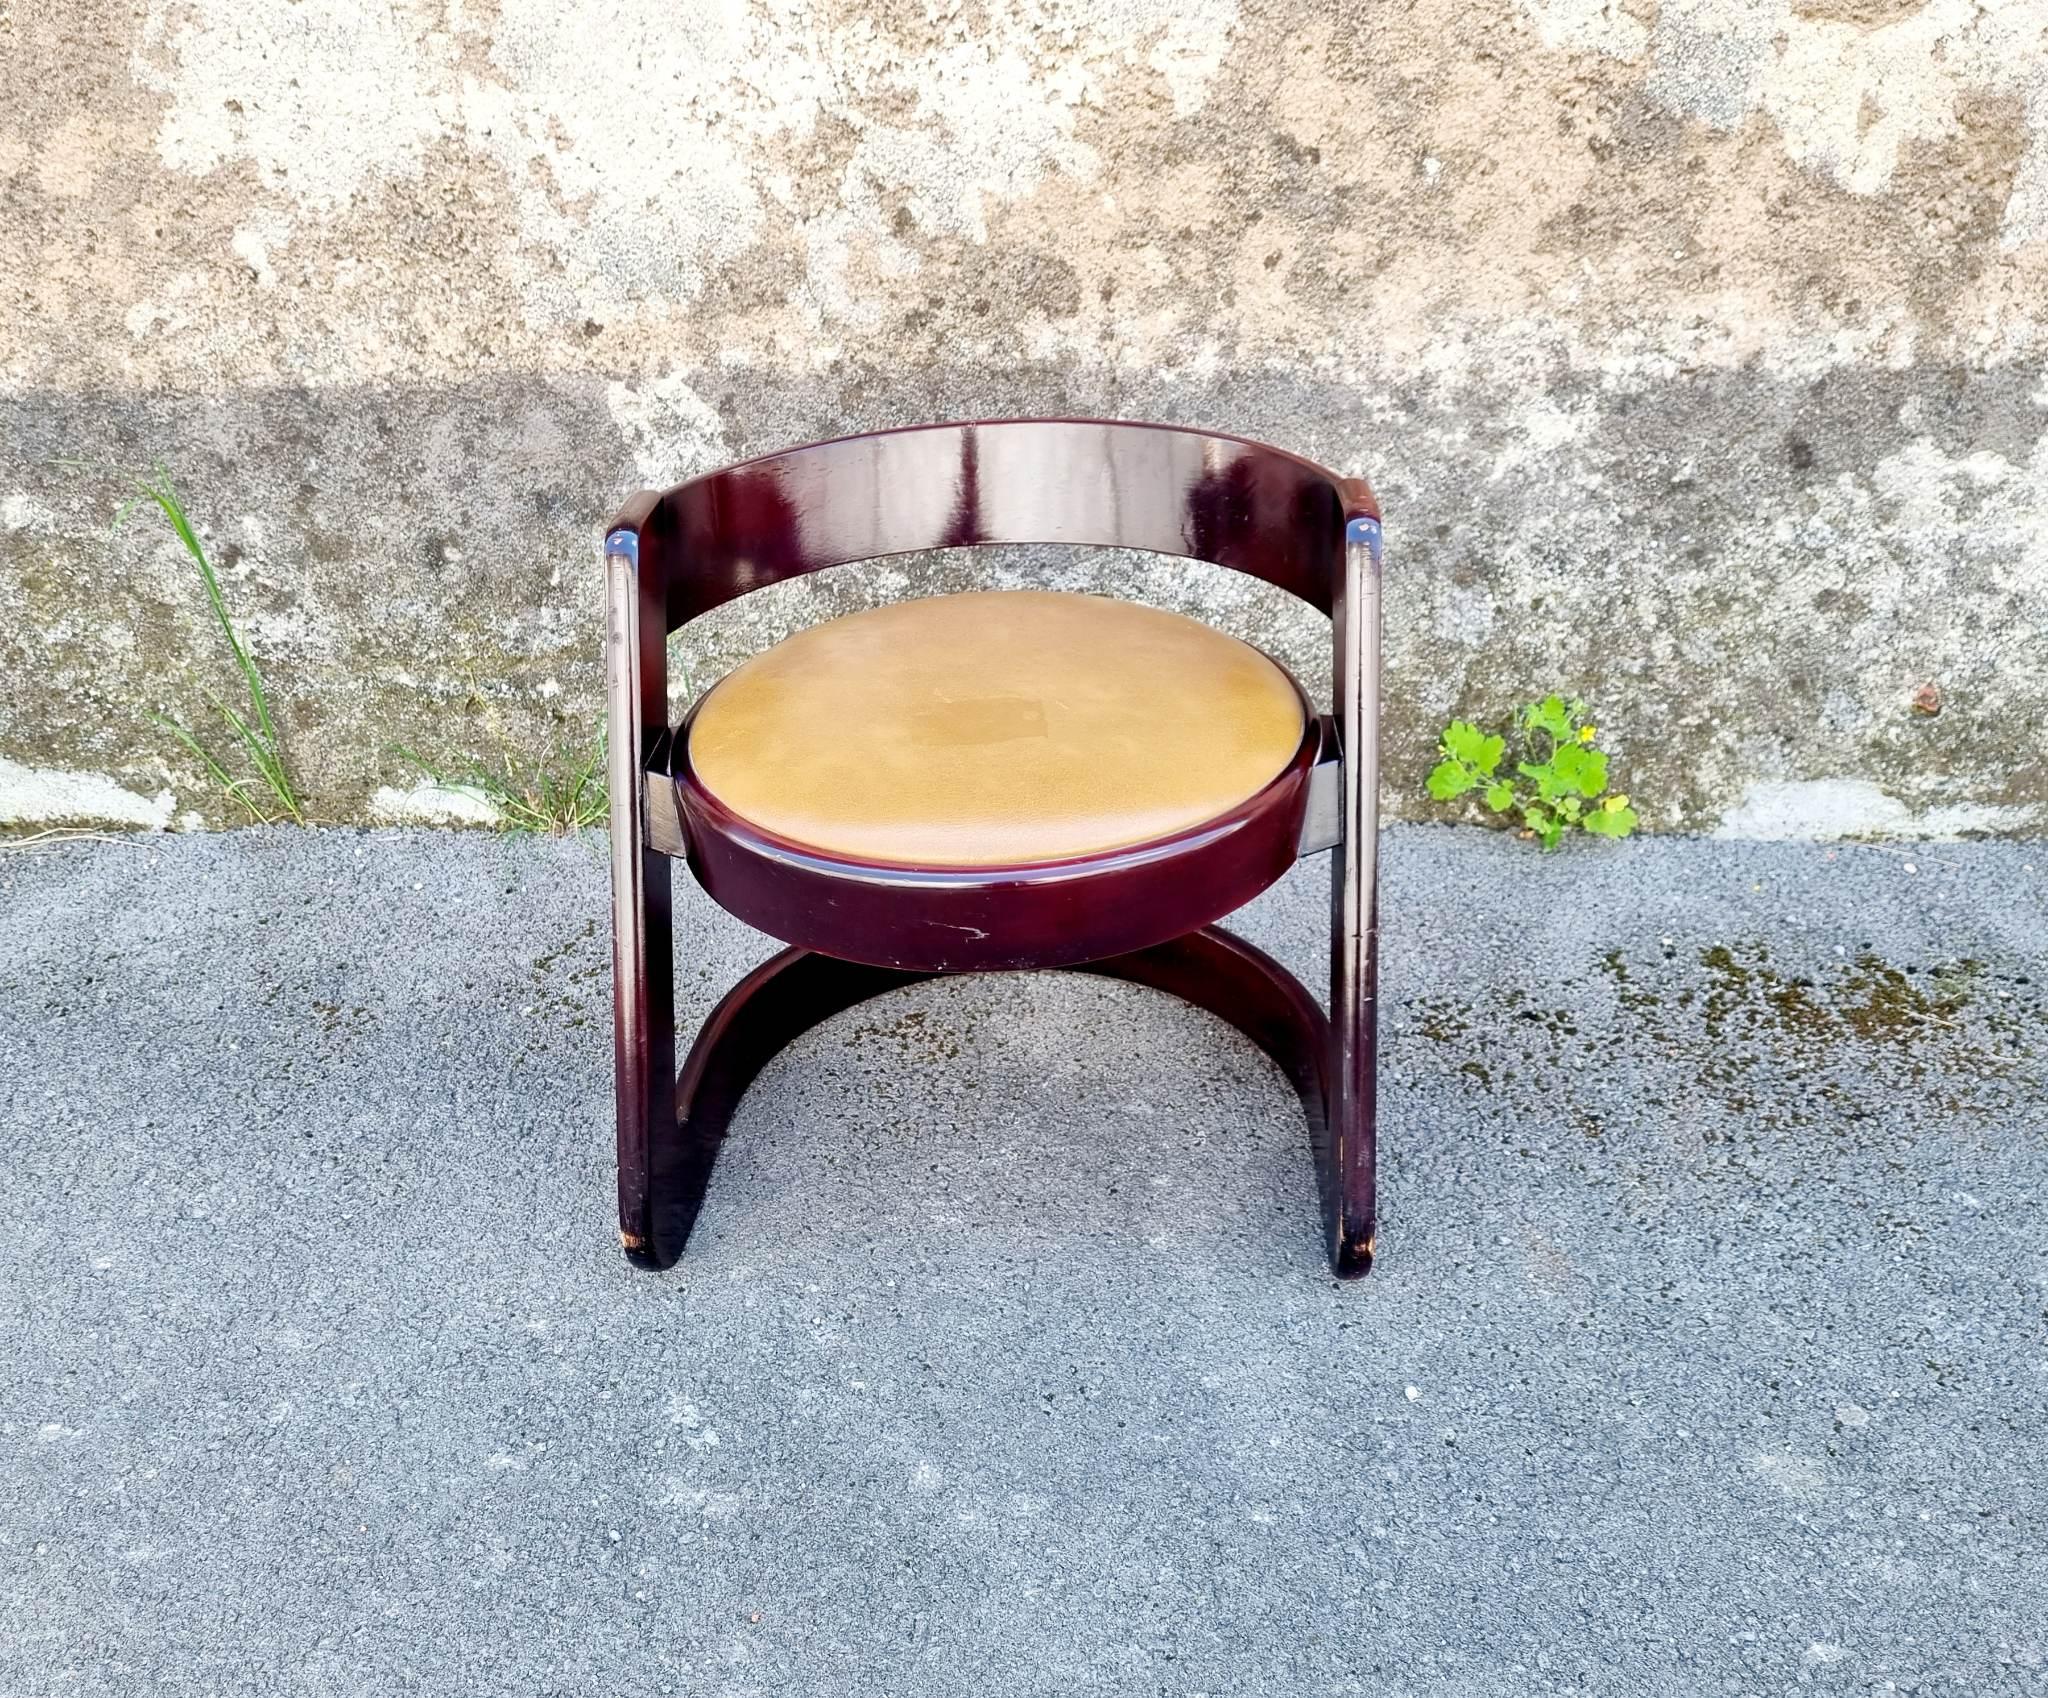 Rare Midcentury Stool by Willy Rizzo for Mario Sabot, Italy 70s For Sale 3